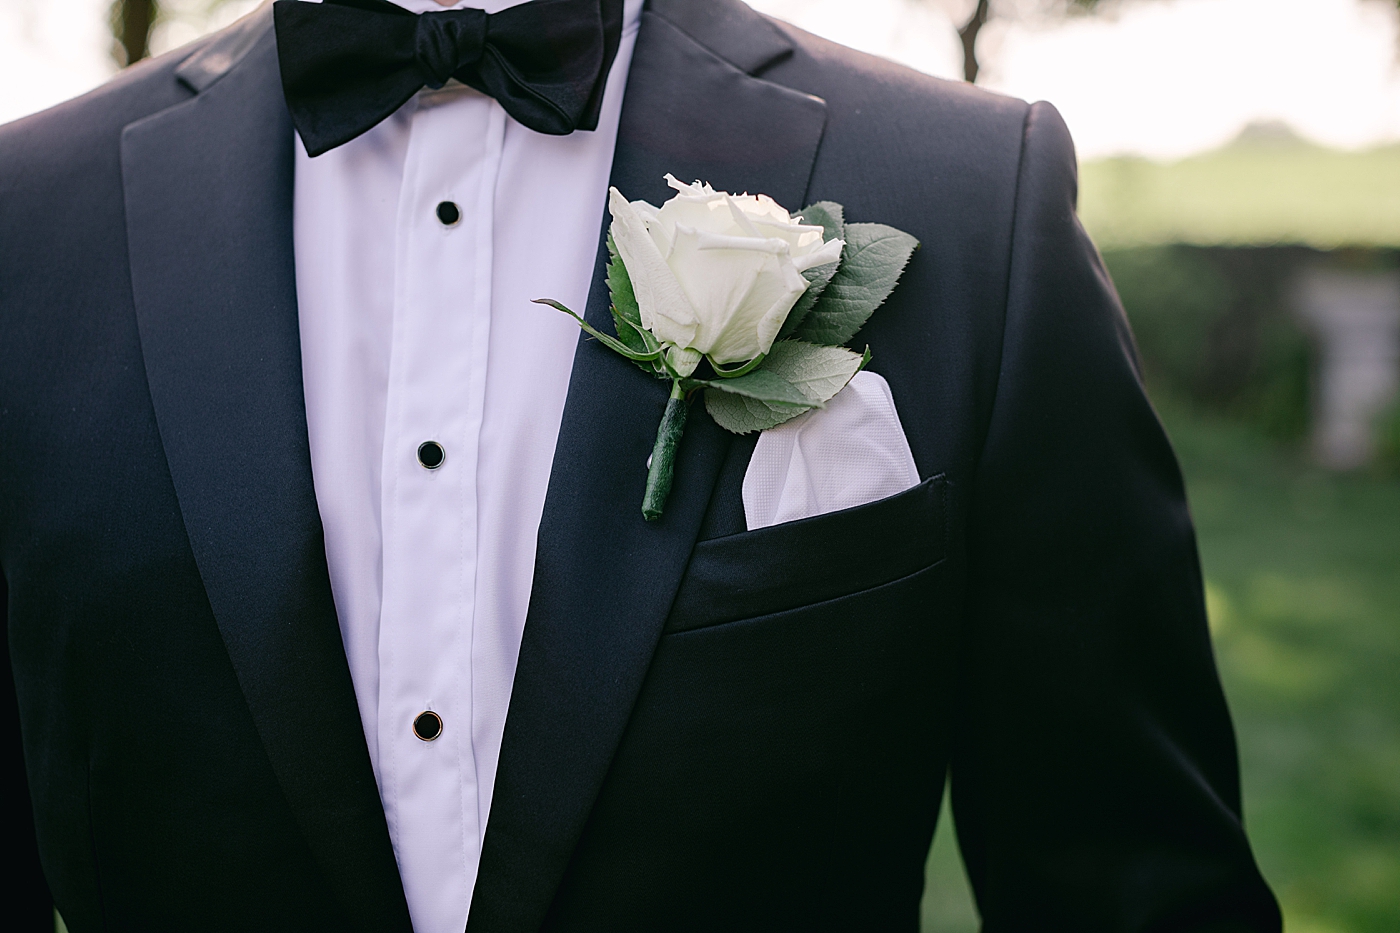 Groom floral details | Image by Hope Helmuth Photography